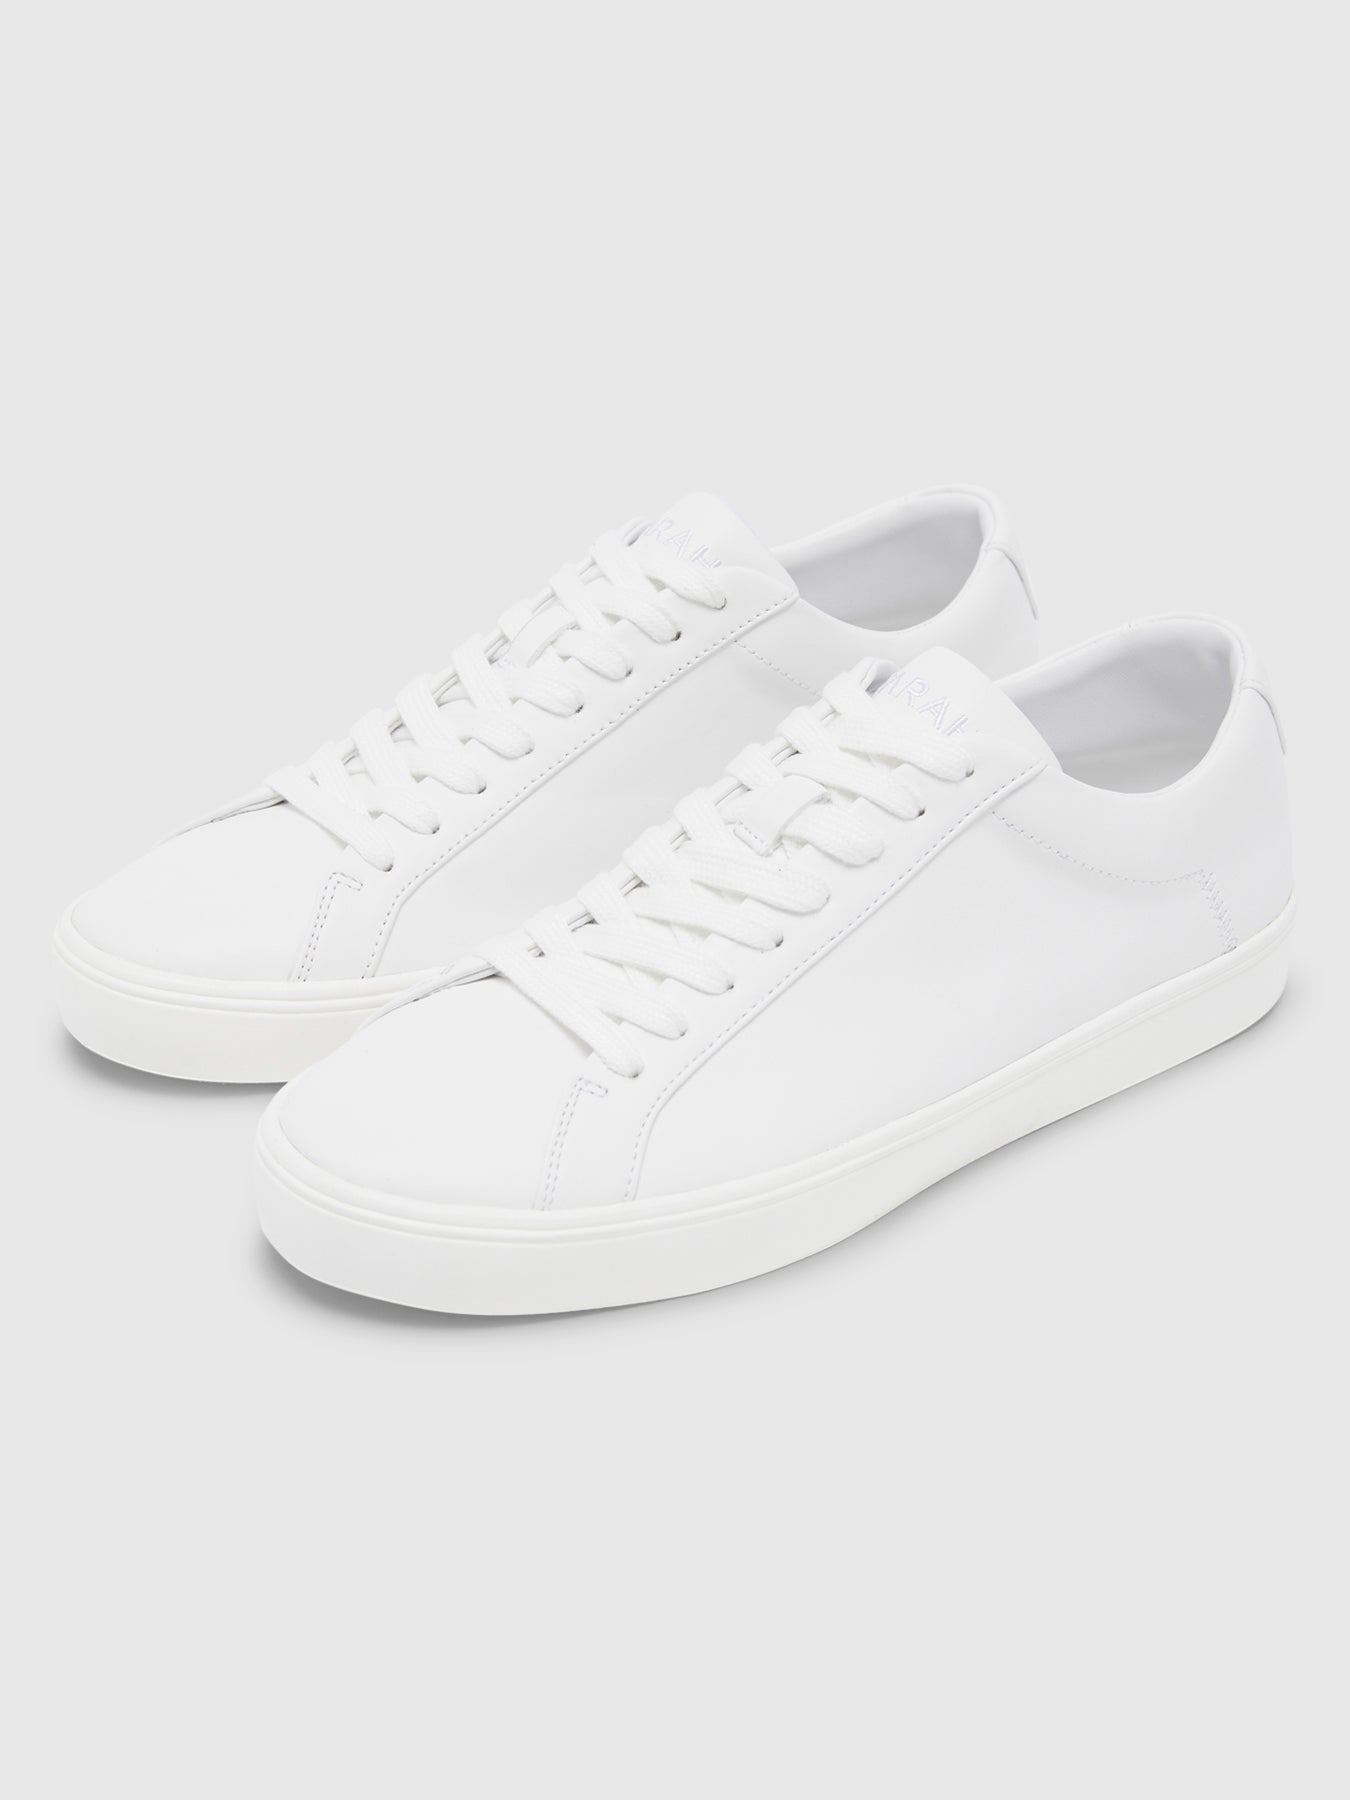 View Rigby Cupsole Leather Trainer In White information